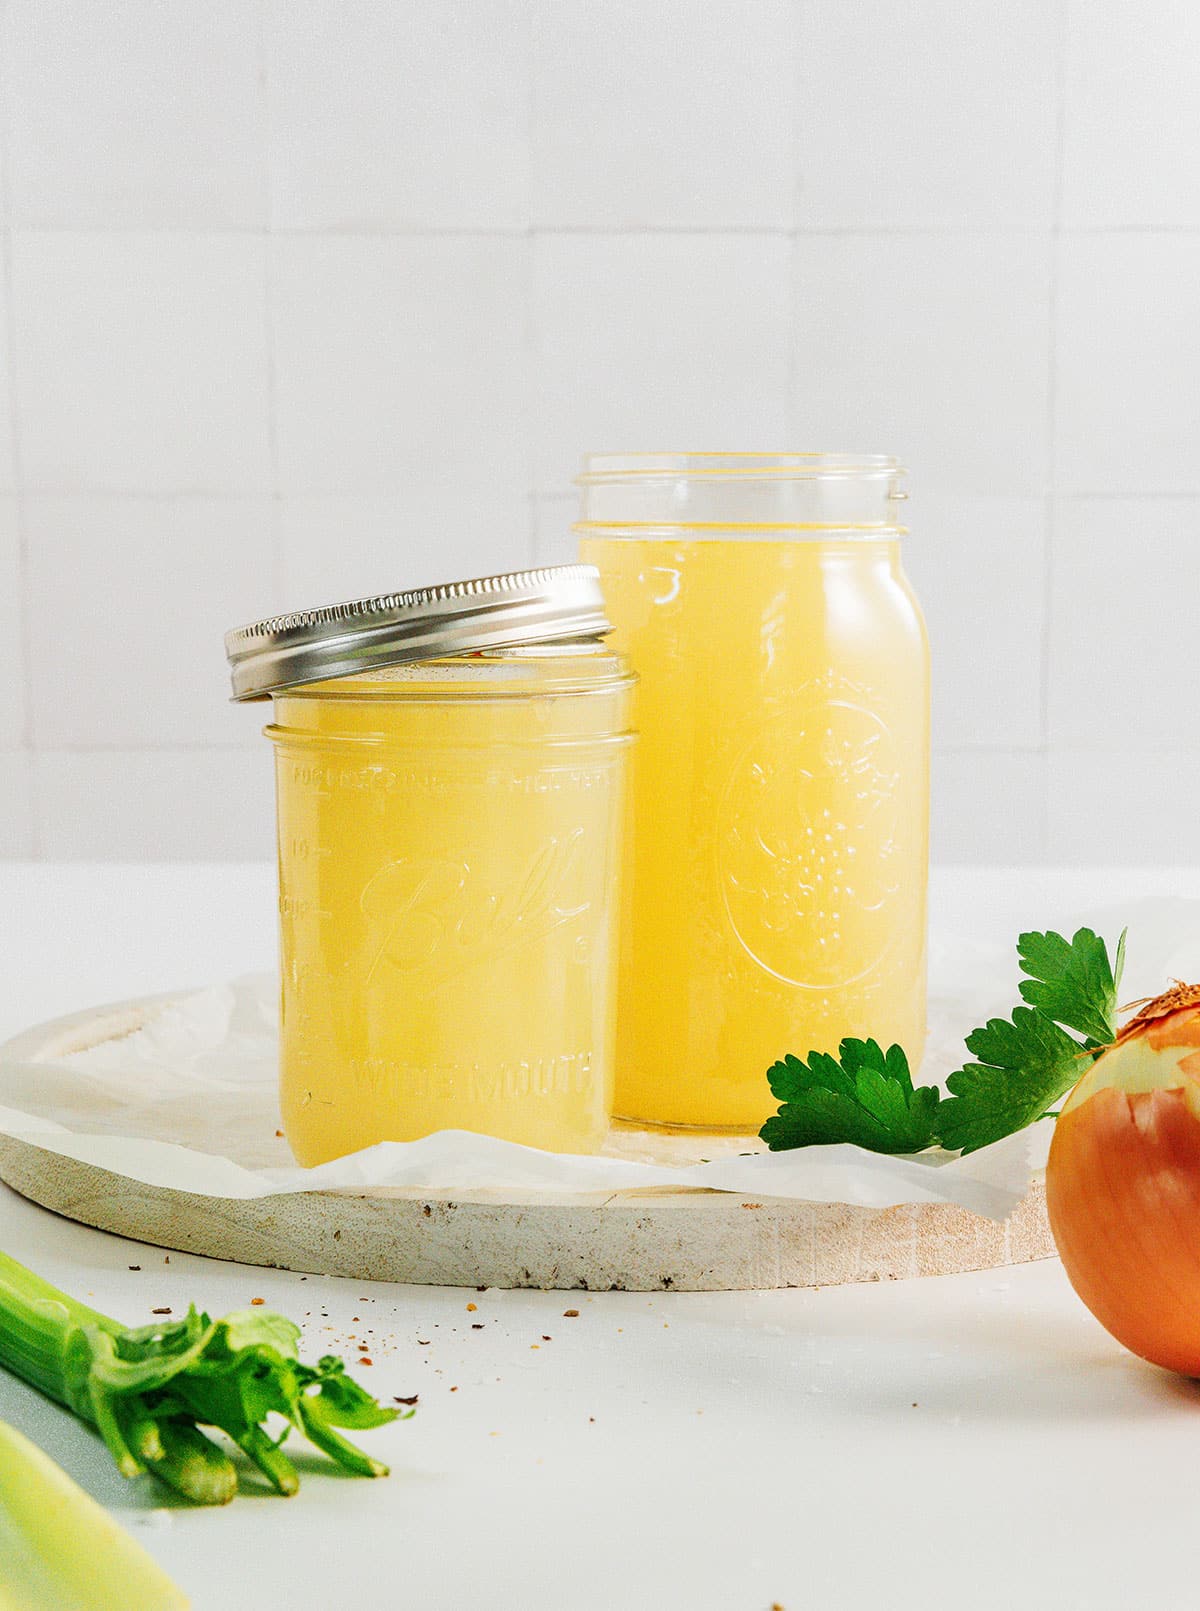 Yellow colored finished broth in glass jars with a metal lid. Set on a white counter top and parchment paper.